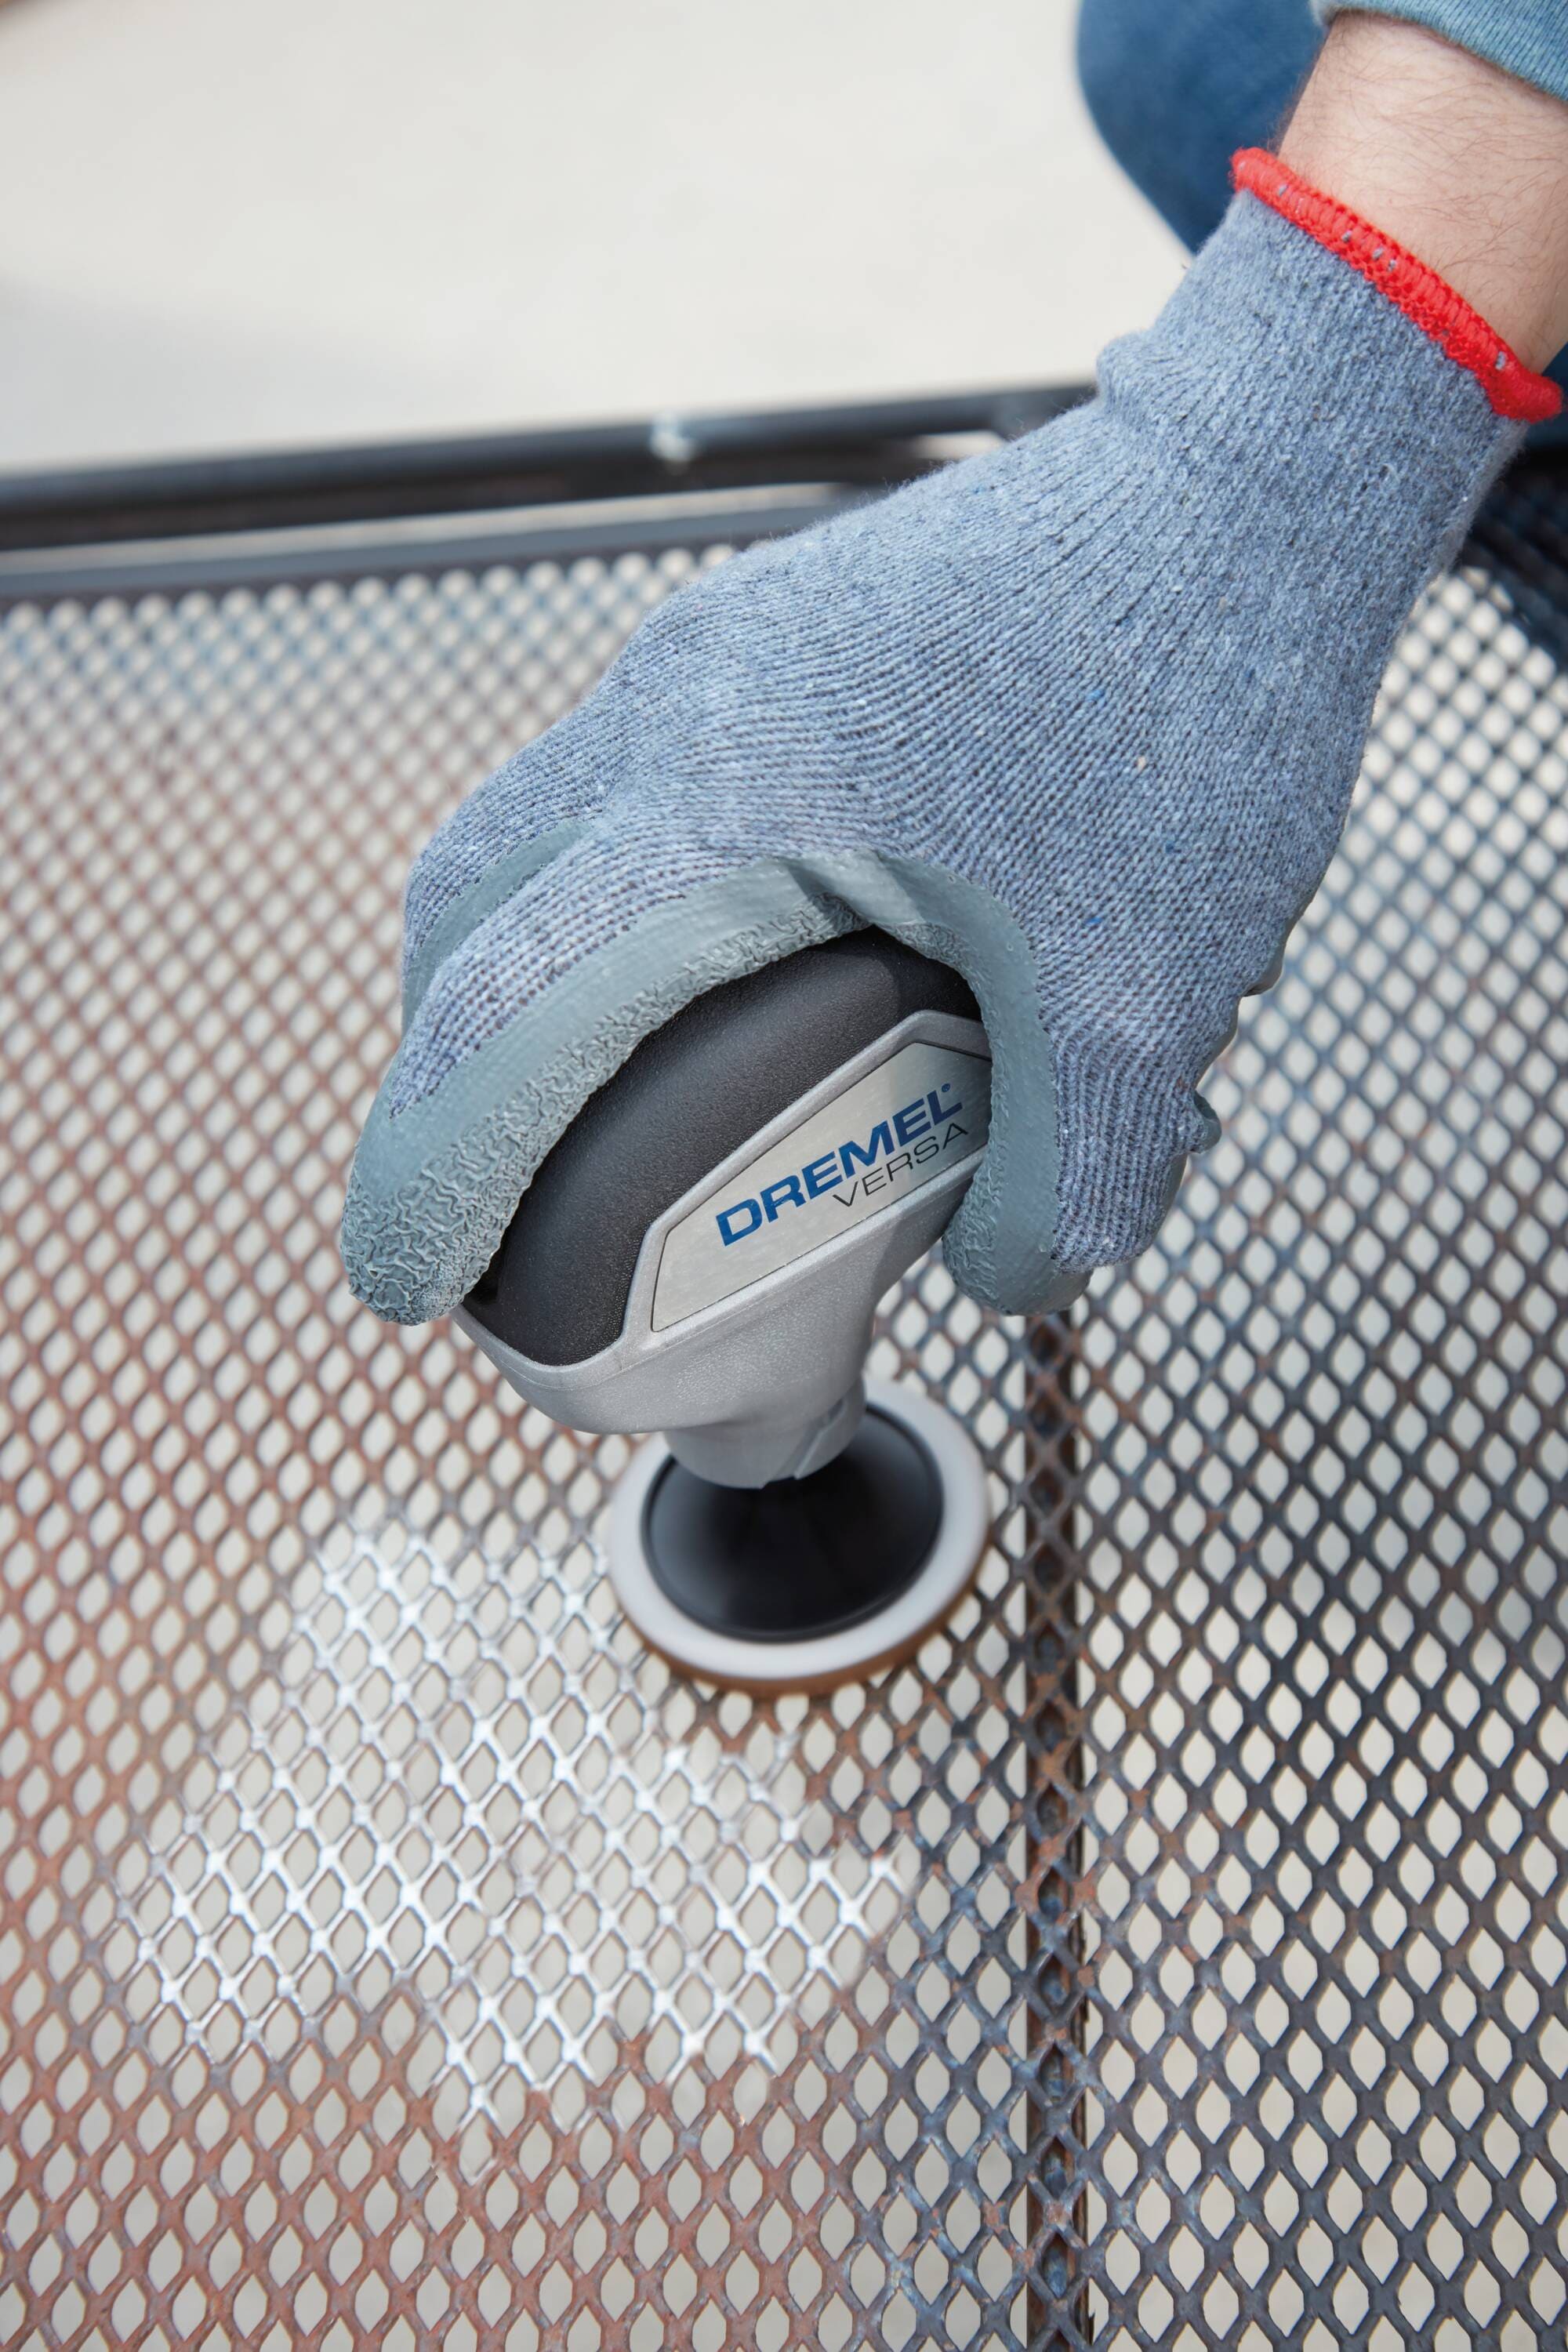 department the at Power Dremel in Versa Scrubbers Power Scrubber